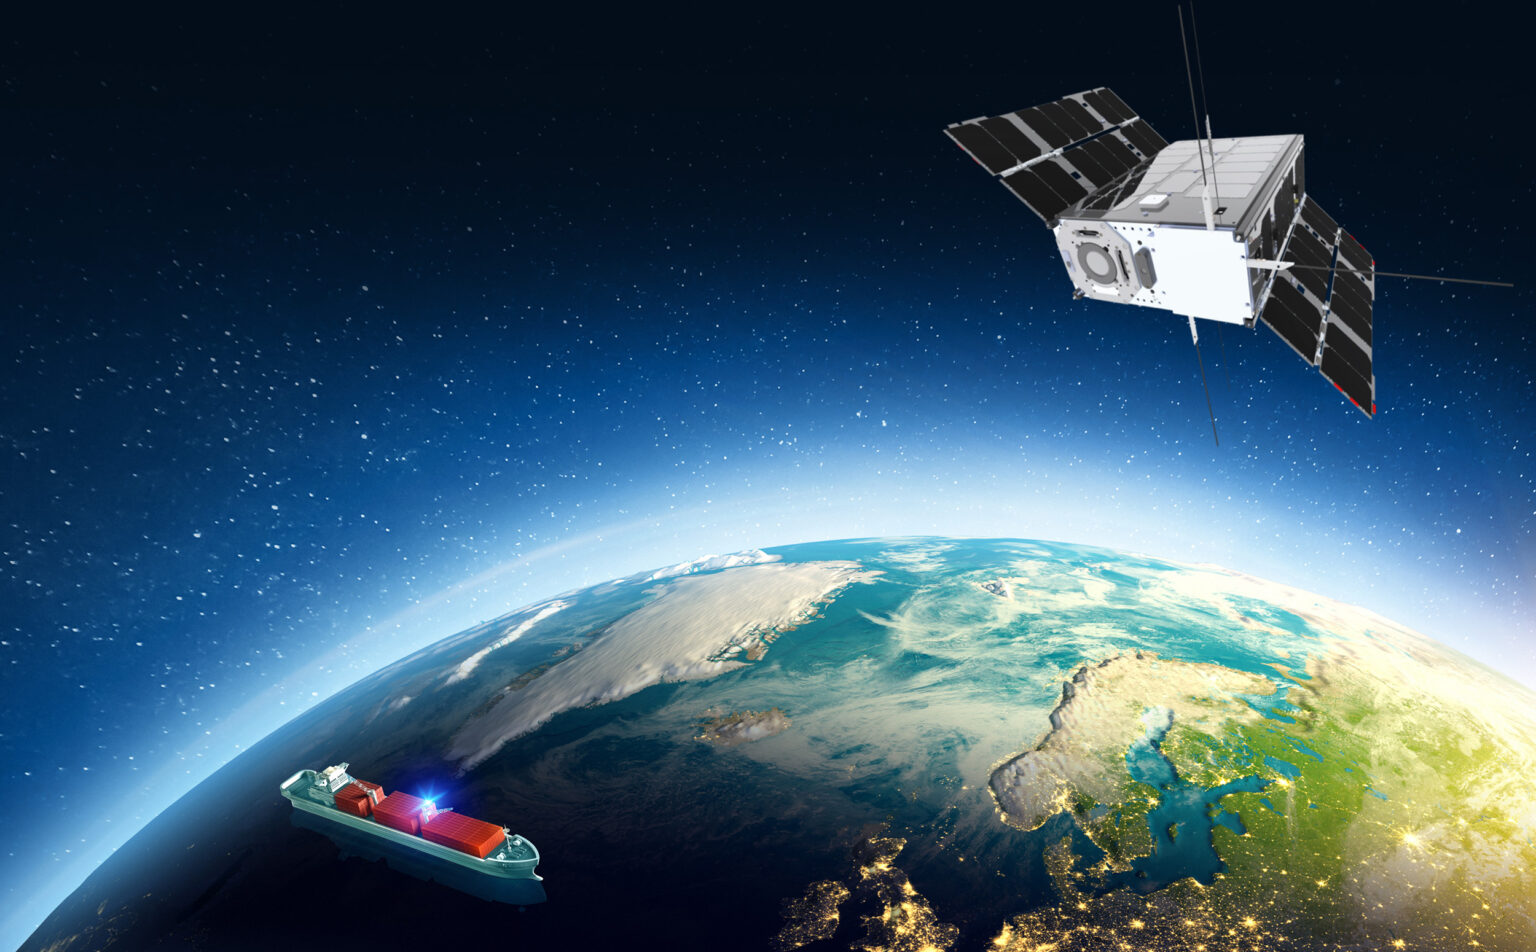 The satellite will spy on illegal transport activities by detecting the weak signals